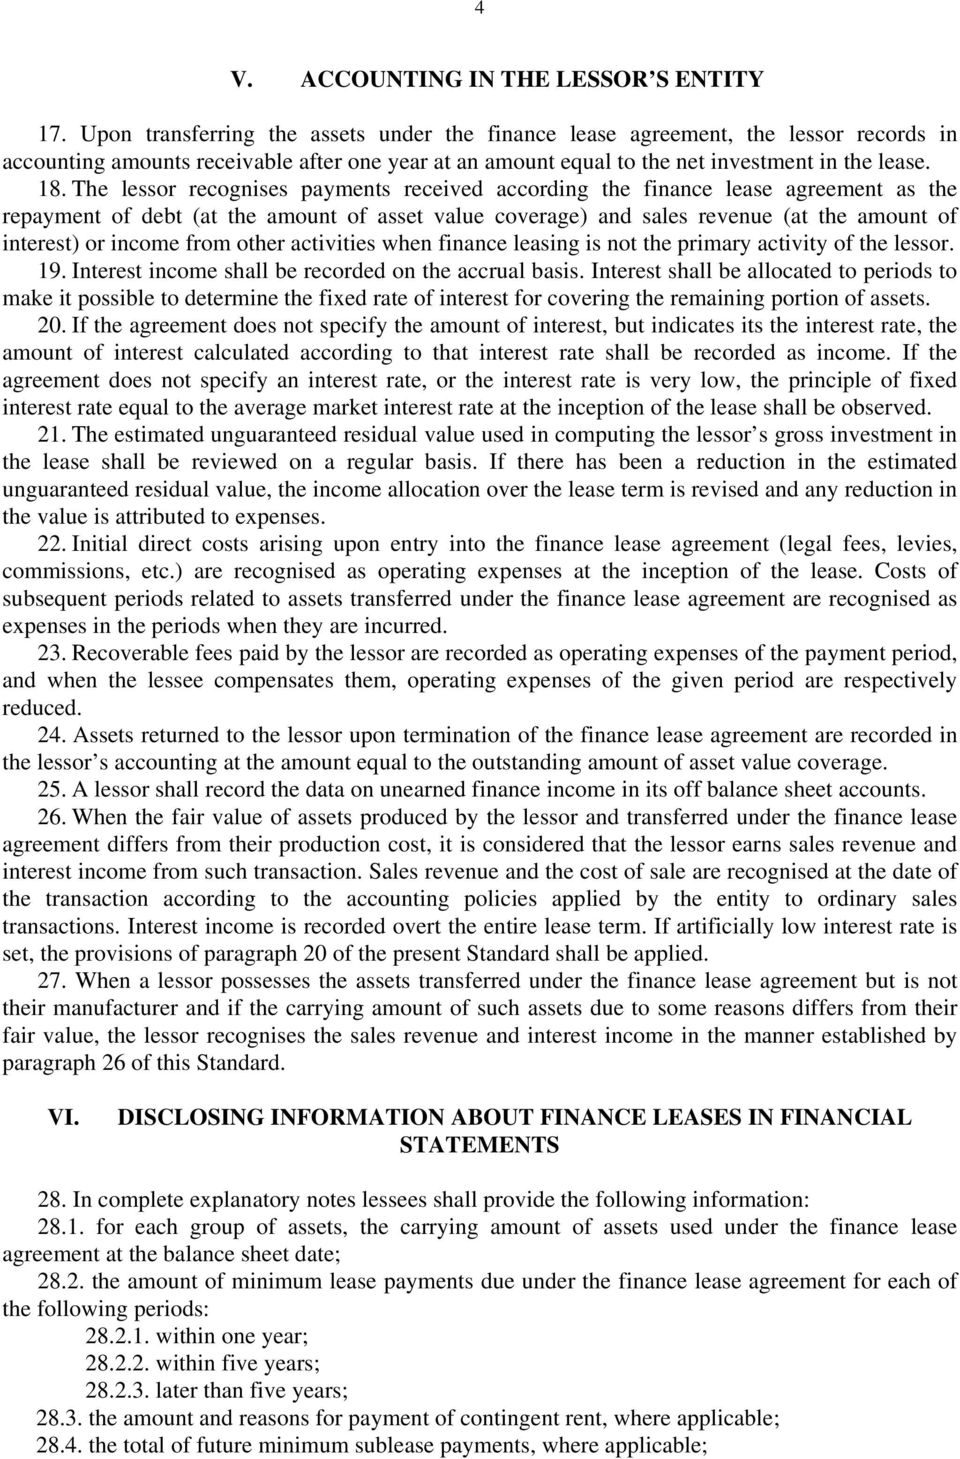 The lessor recognises payments received according the finance lease agreement as the repayment of debt (at the amount of asset value coverage) and sales revenue (at the amount of interest) or income